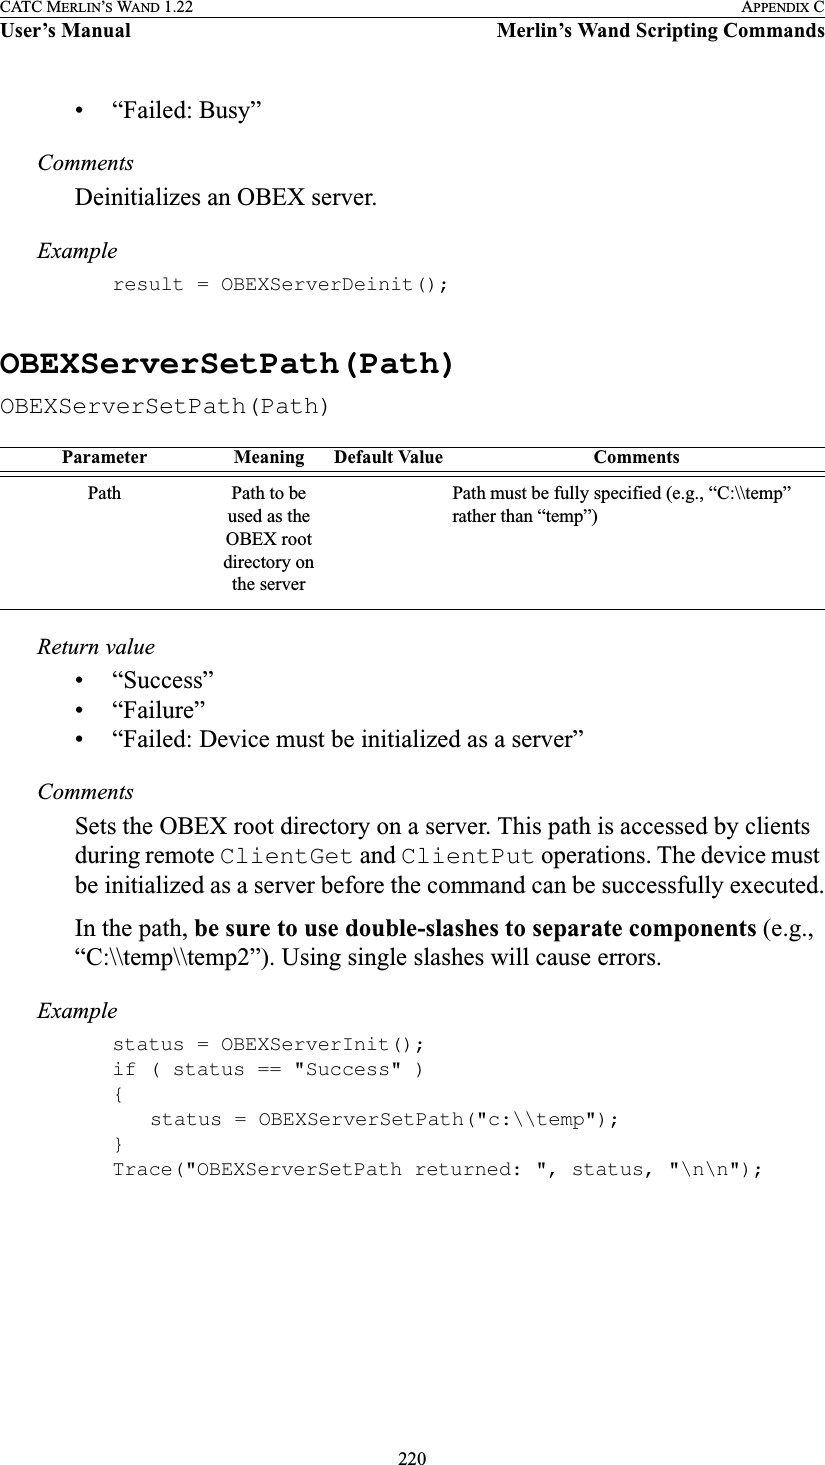 220CATC MERLIN’S WAND 1.22 APPENDIX CUser’s Manual Merlin’s Wand Scripting Commands• “Failed: Busy”CommentsDeinitializes an OBEX server.Exampleresult = OBEXServerDeinit();OBEXServerSetPath(Path)OBEXServerSetPath(Path)Return value• “Success”• “Failure”• “Failed: Device must be initialized as a server”CommentsSets the OBEX root directory on a server. This path is accessed by clients during remote ClientGet and ClientPut operations. The device must be initialized as a server before the command can be successfully executed.In the path, be sure to use double-slashes to separate components (e.g., “C:\\temp\\temp2”). Using single slashes will cause errors.Examplestatus = OBEXServerInit();if ( status == &quot;Success&quot; ){status = OBEXServerSetPath(&quot;c:\\temp&quot;);}Trace(&quot;OBEXServerSetPath returned: &quot;, status, &quot;\n\n&quot;);Parameter Meaning Default Value CommentsPath Path to be used as the OBEX root directory on the serverPath must be fully specified (e.g., “C:\\temp” rather than “temp”)